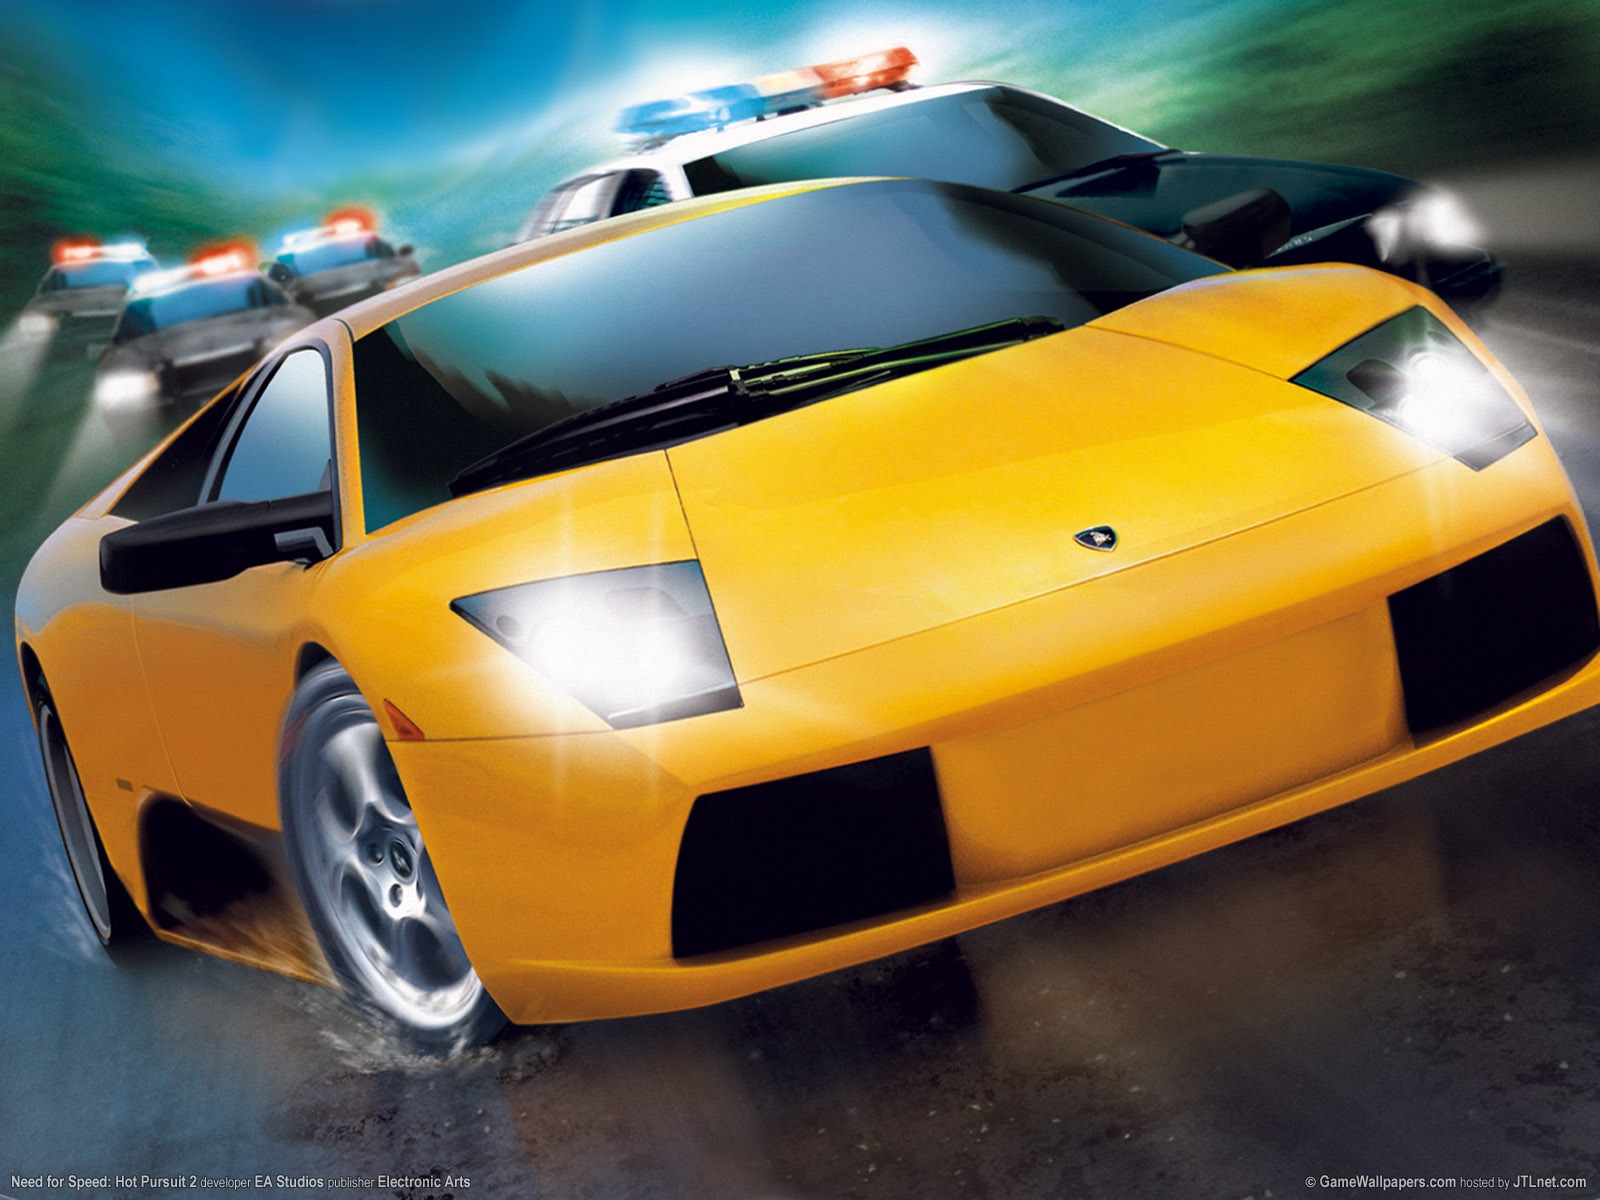 Need for Speed: Hot Pursuit 極品飛車14：熱力追踪 #8 - 1600x1200